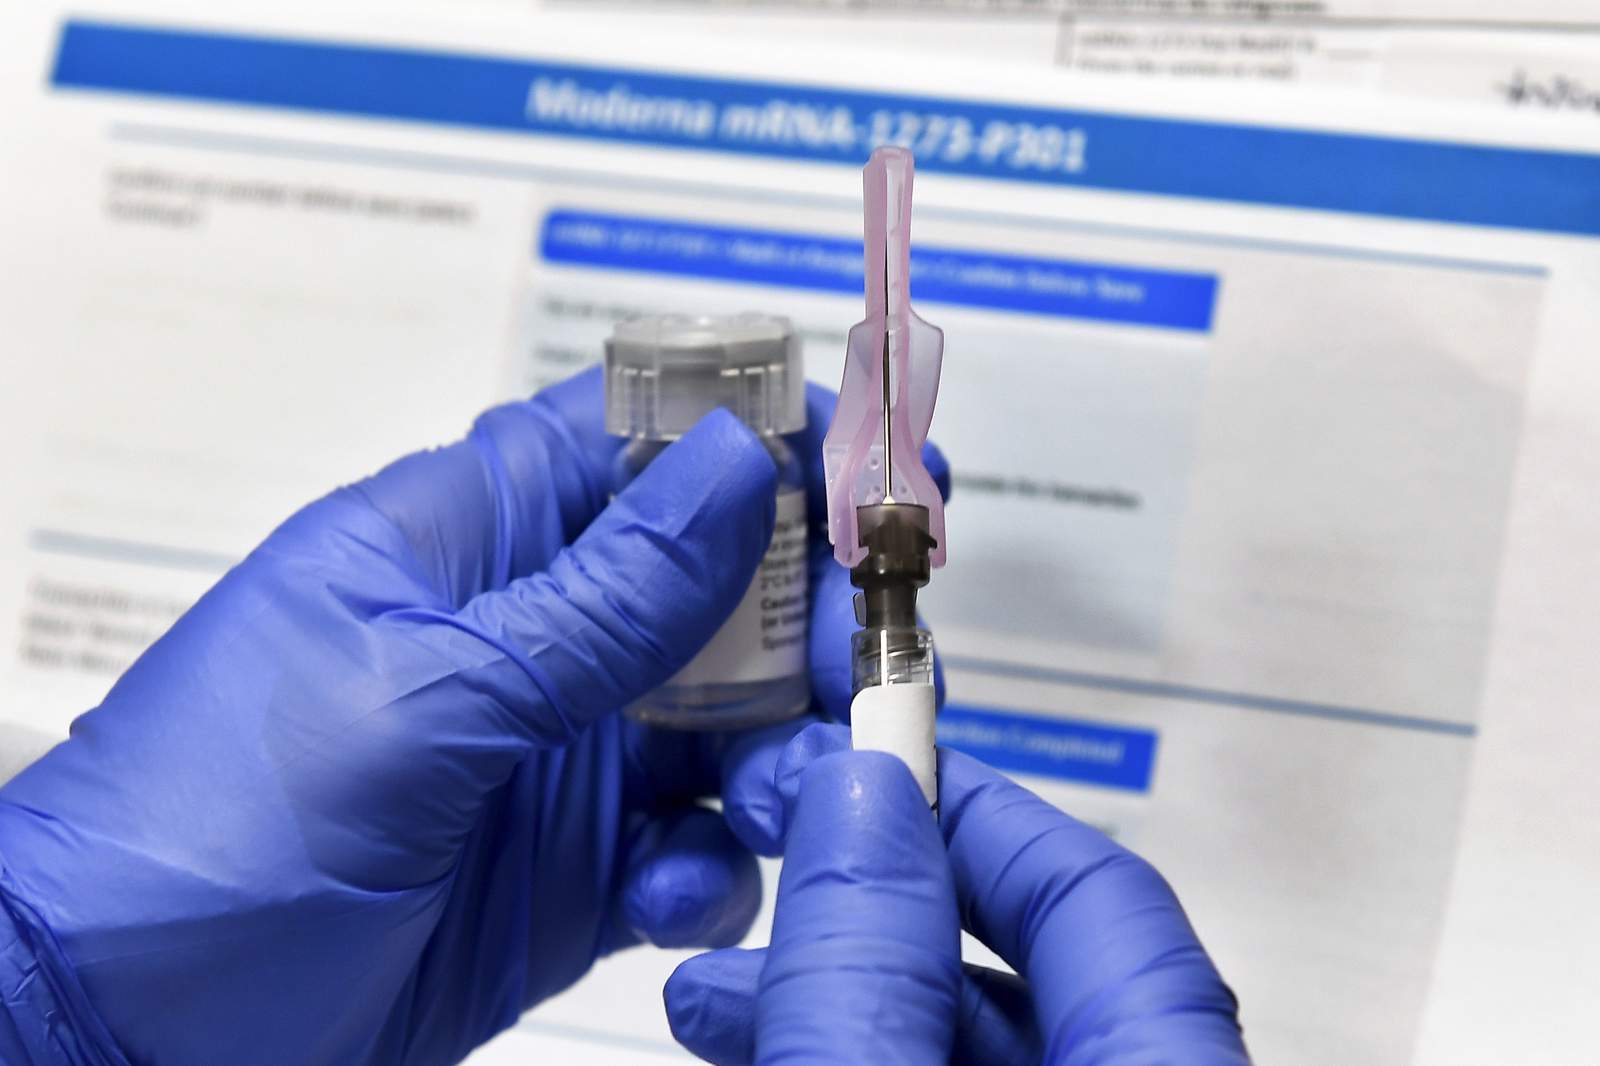 Companies testing vaccines pledge safety, high standards